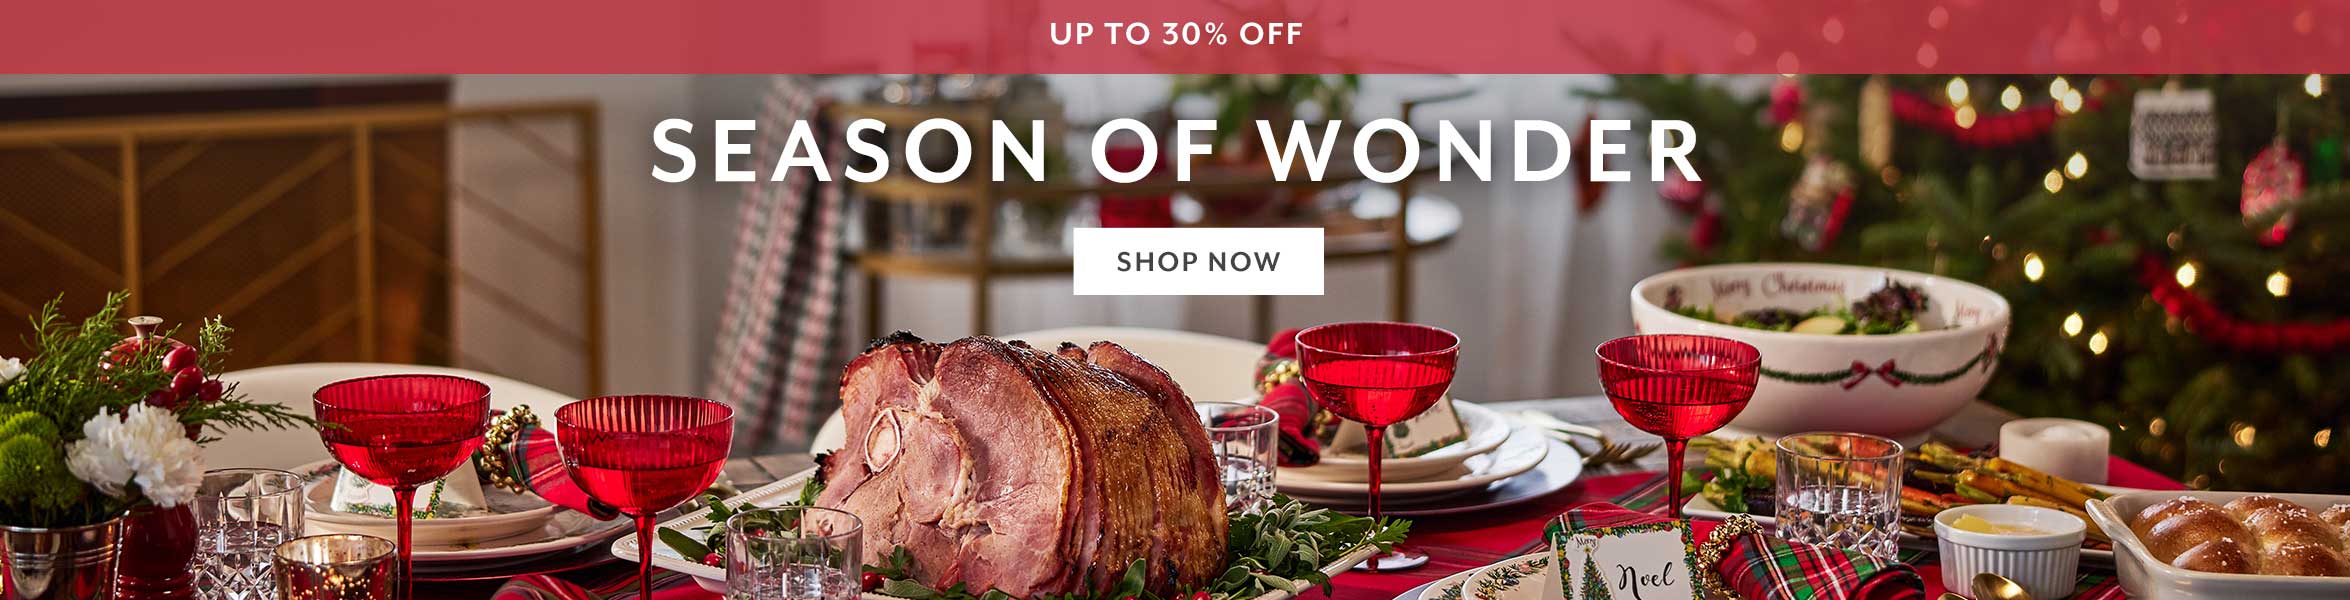 Season of Wonder up to 30% off. Shop Now.